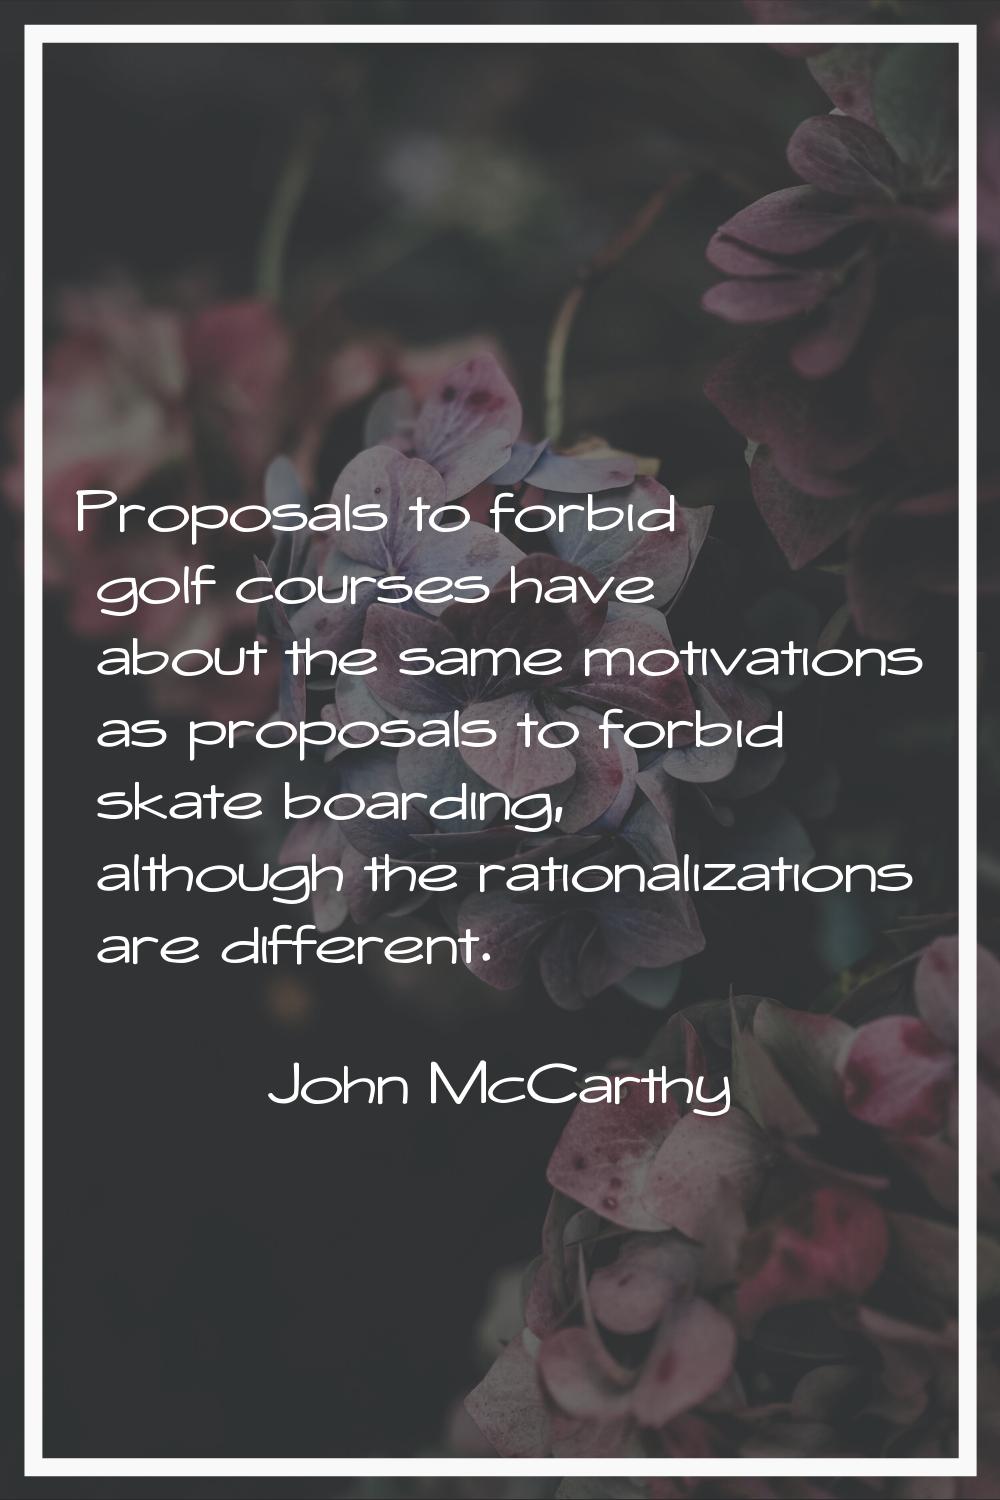 Proposals to forbid golf courses have about the same motivations as proposals to forbid skate board